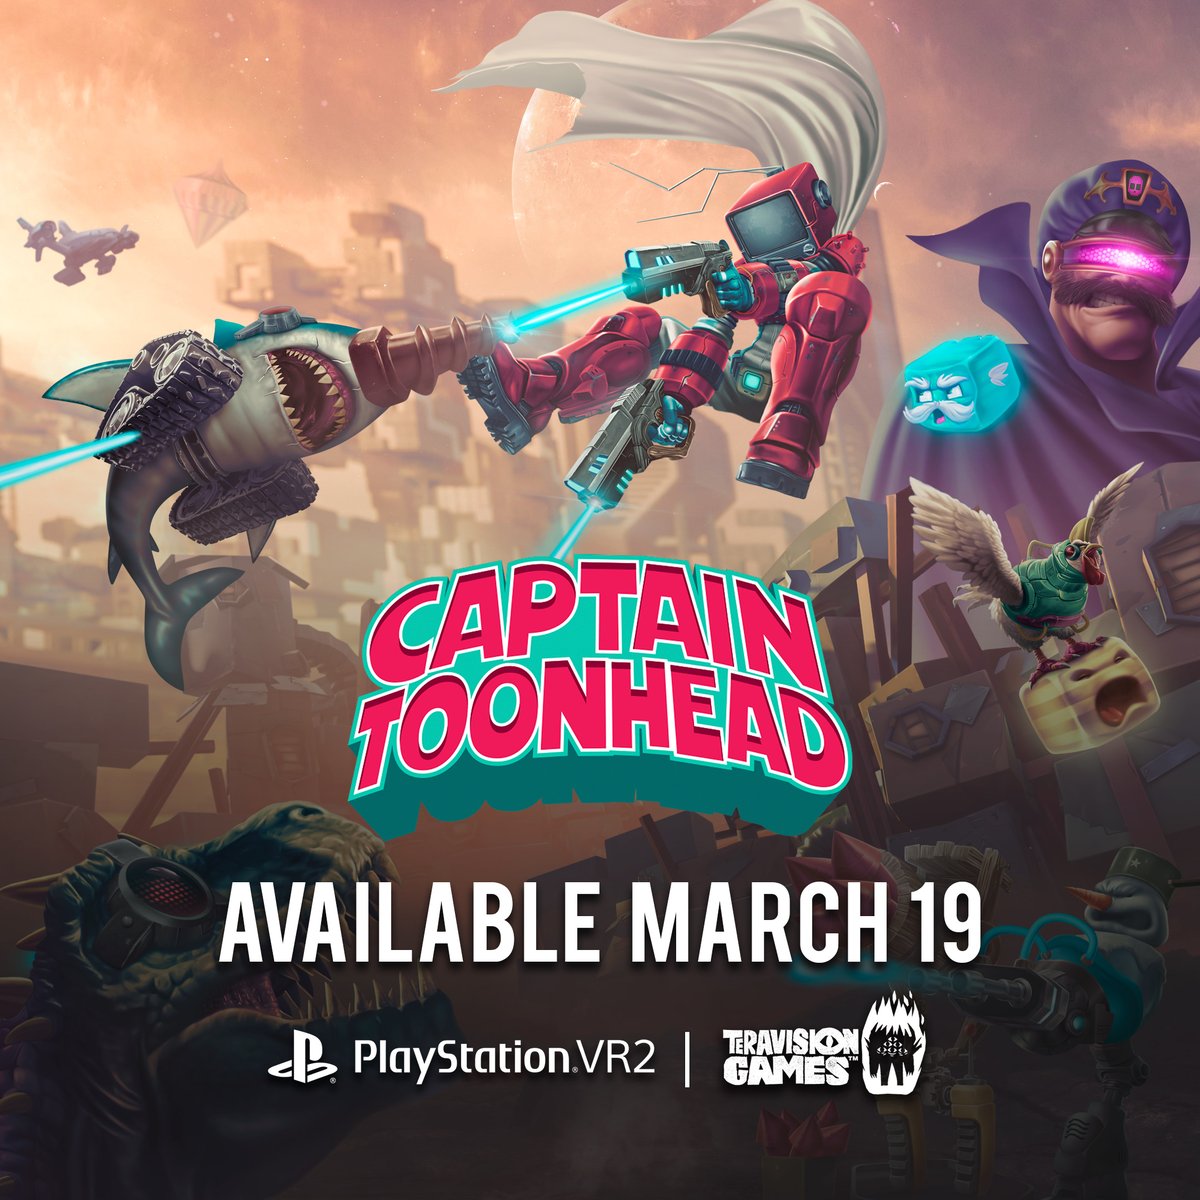 🚨 The Aero-C.A.A.T. is out of the bag! Your favorite chancla wielding VR tower defense adventure is coming to PlayStation VR2 NEXT WEEK! You will be able to get Captain ToonHead vs The Punks from Outer Space on the @PlayStation Store starting this March 19 Wishlist now! 🙌🔥